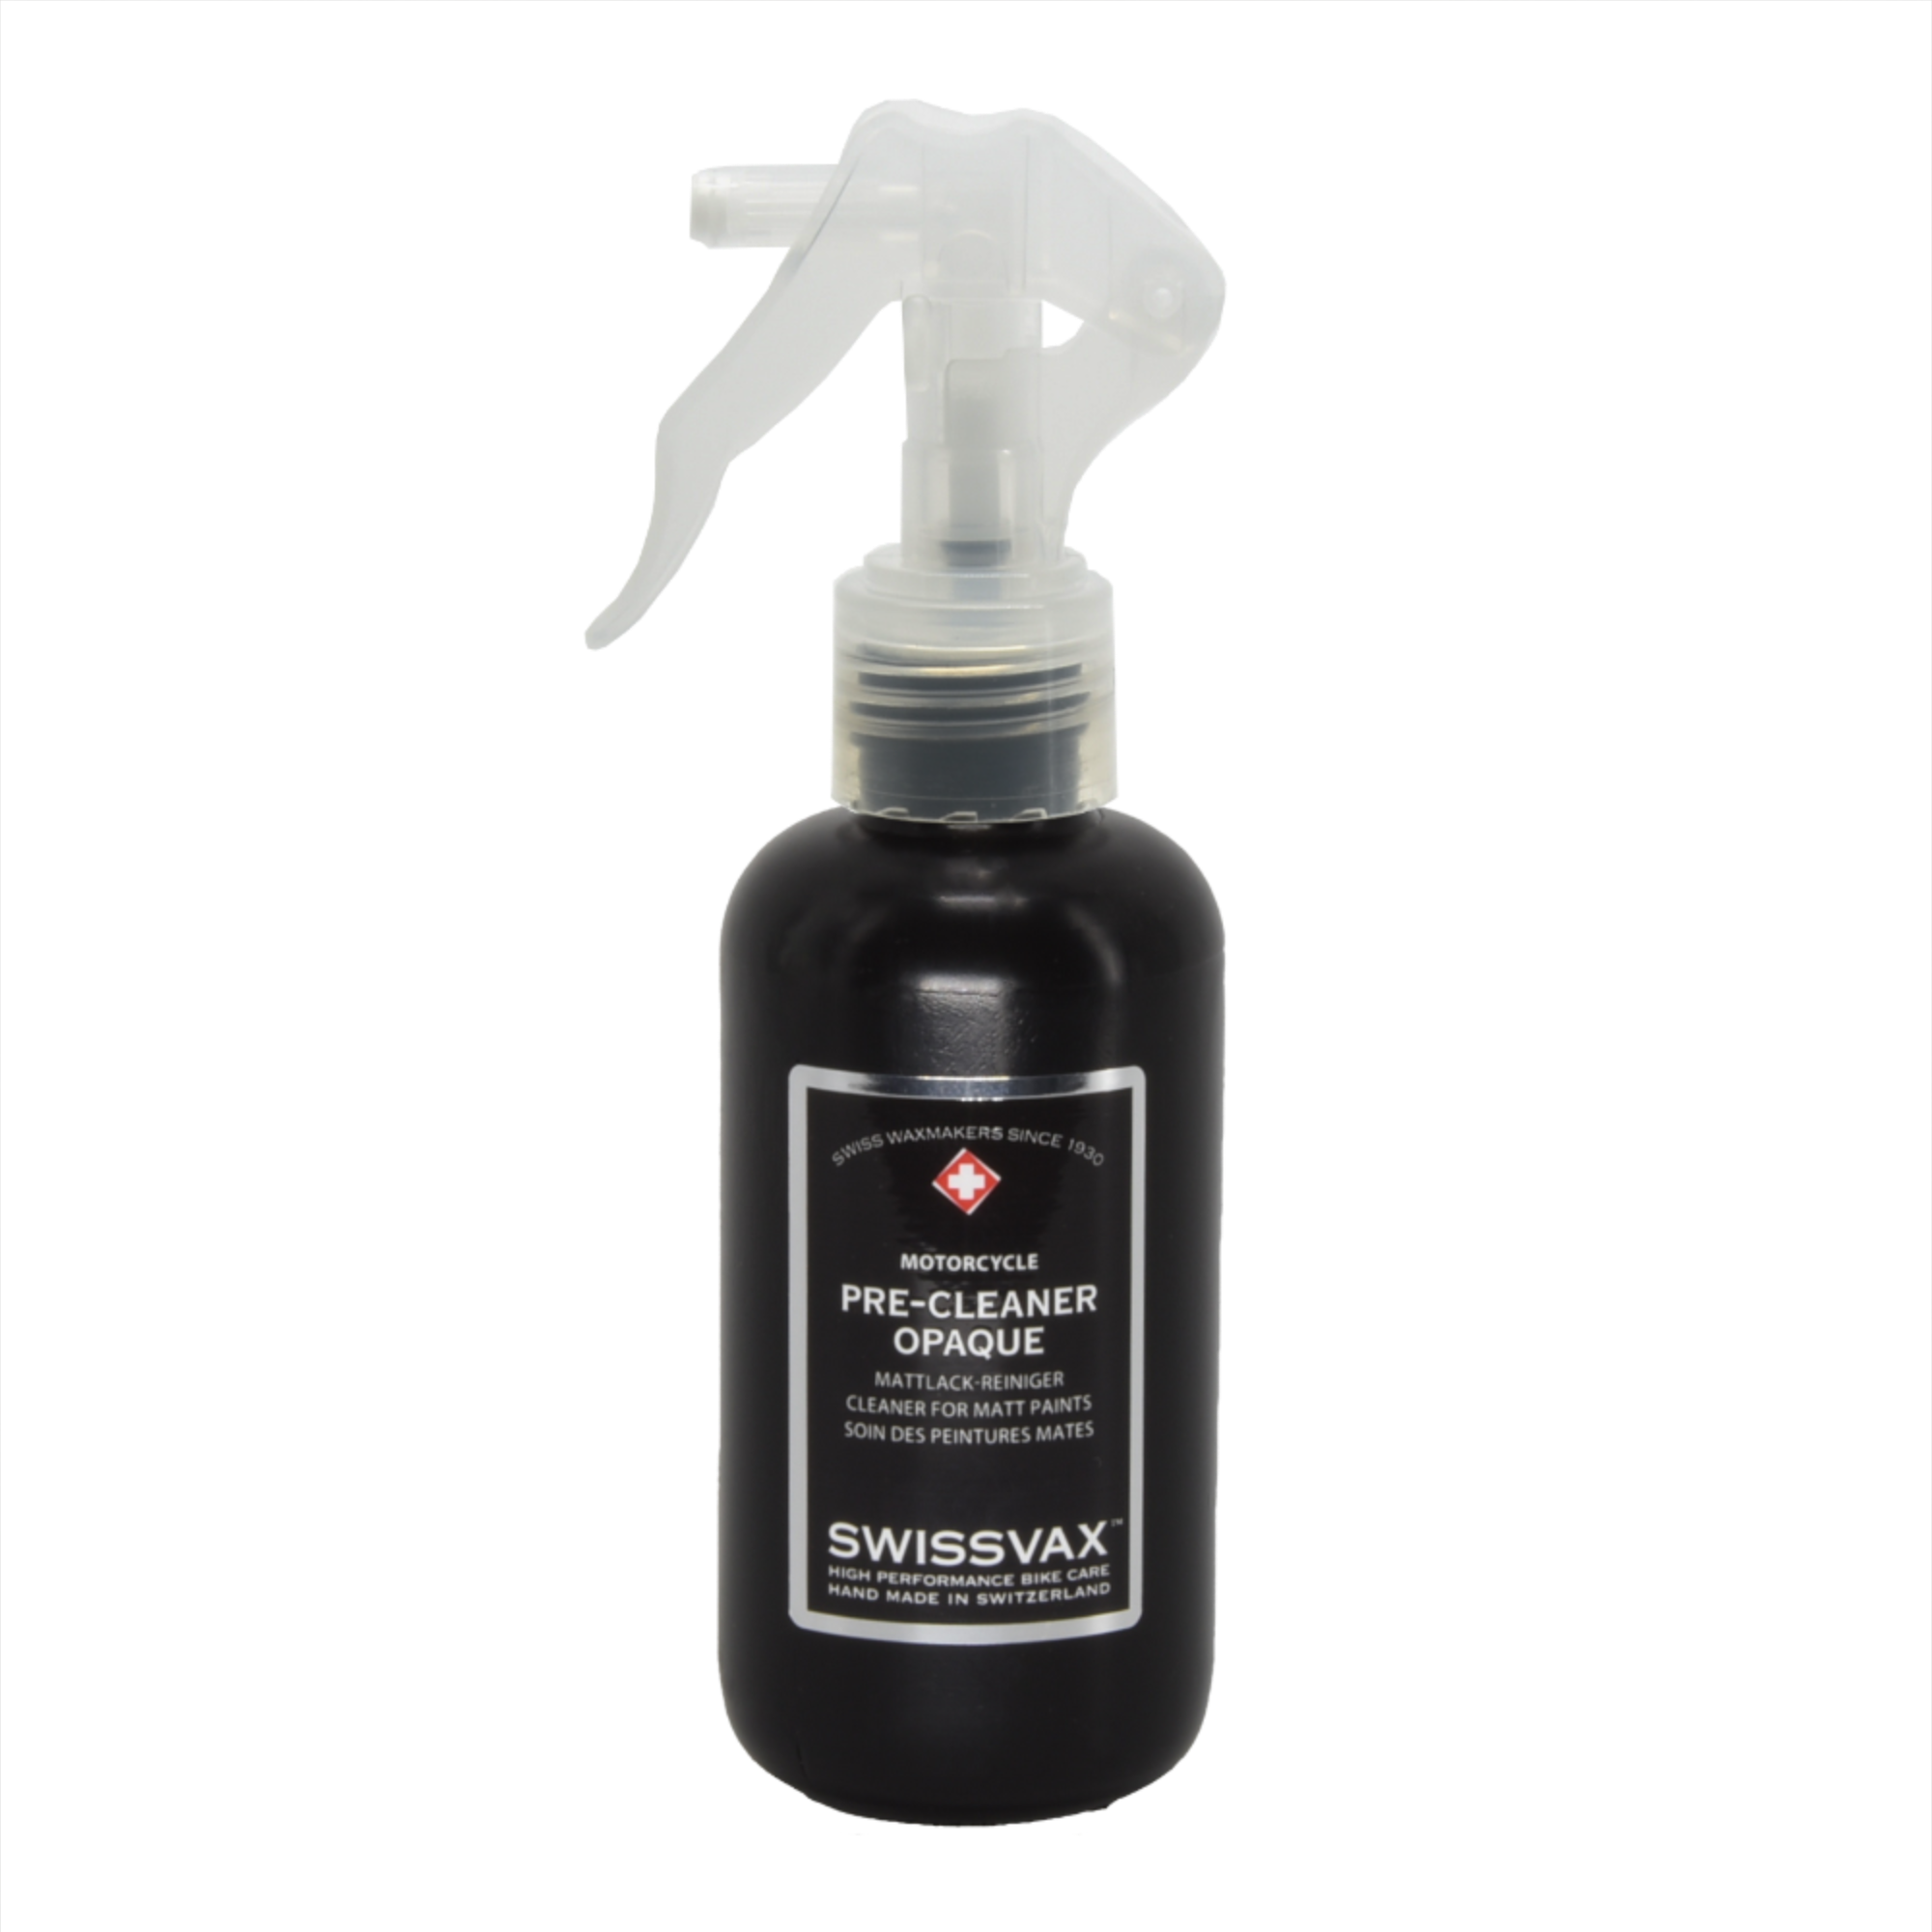 Swissvax Motorcycle PRE-CLEANER OPAQUE Deep cleanser for matt finished paintwork